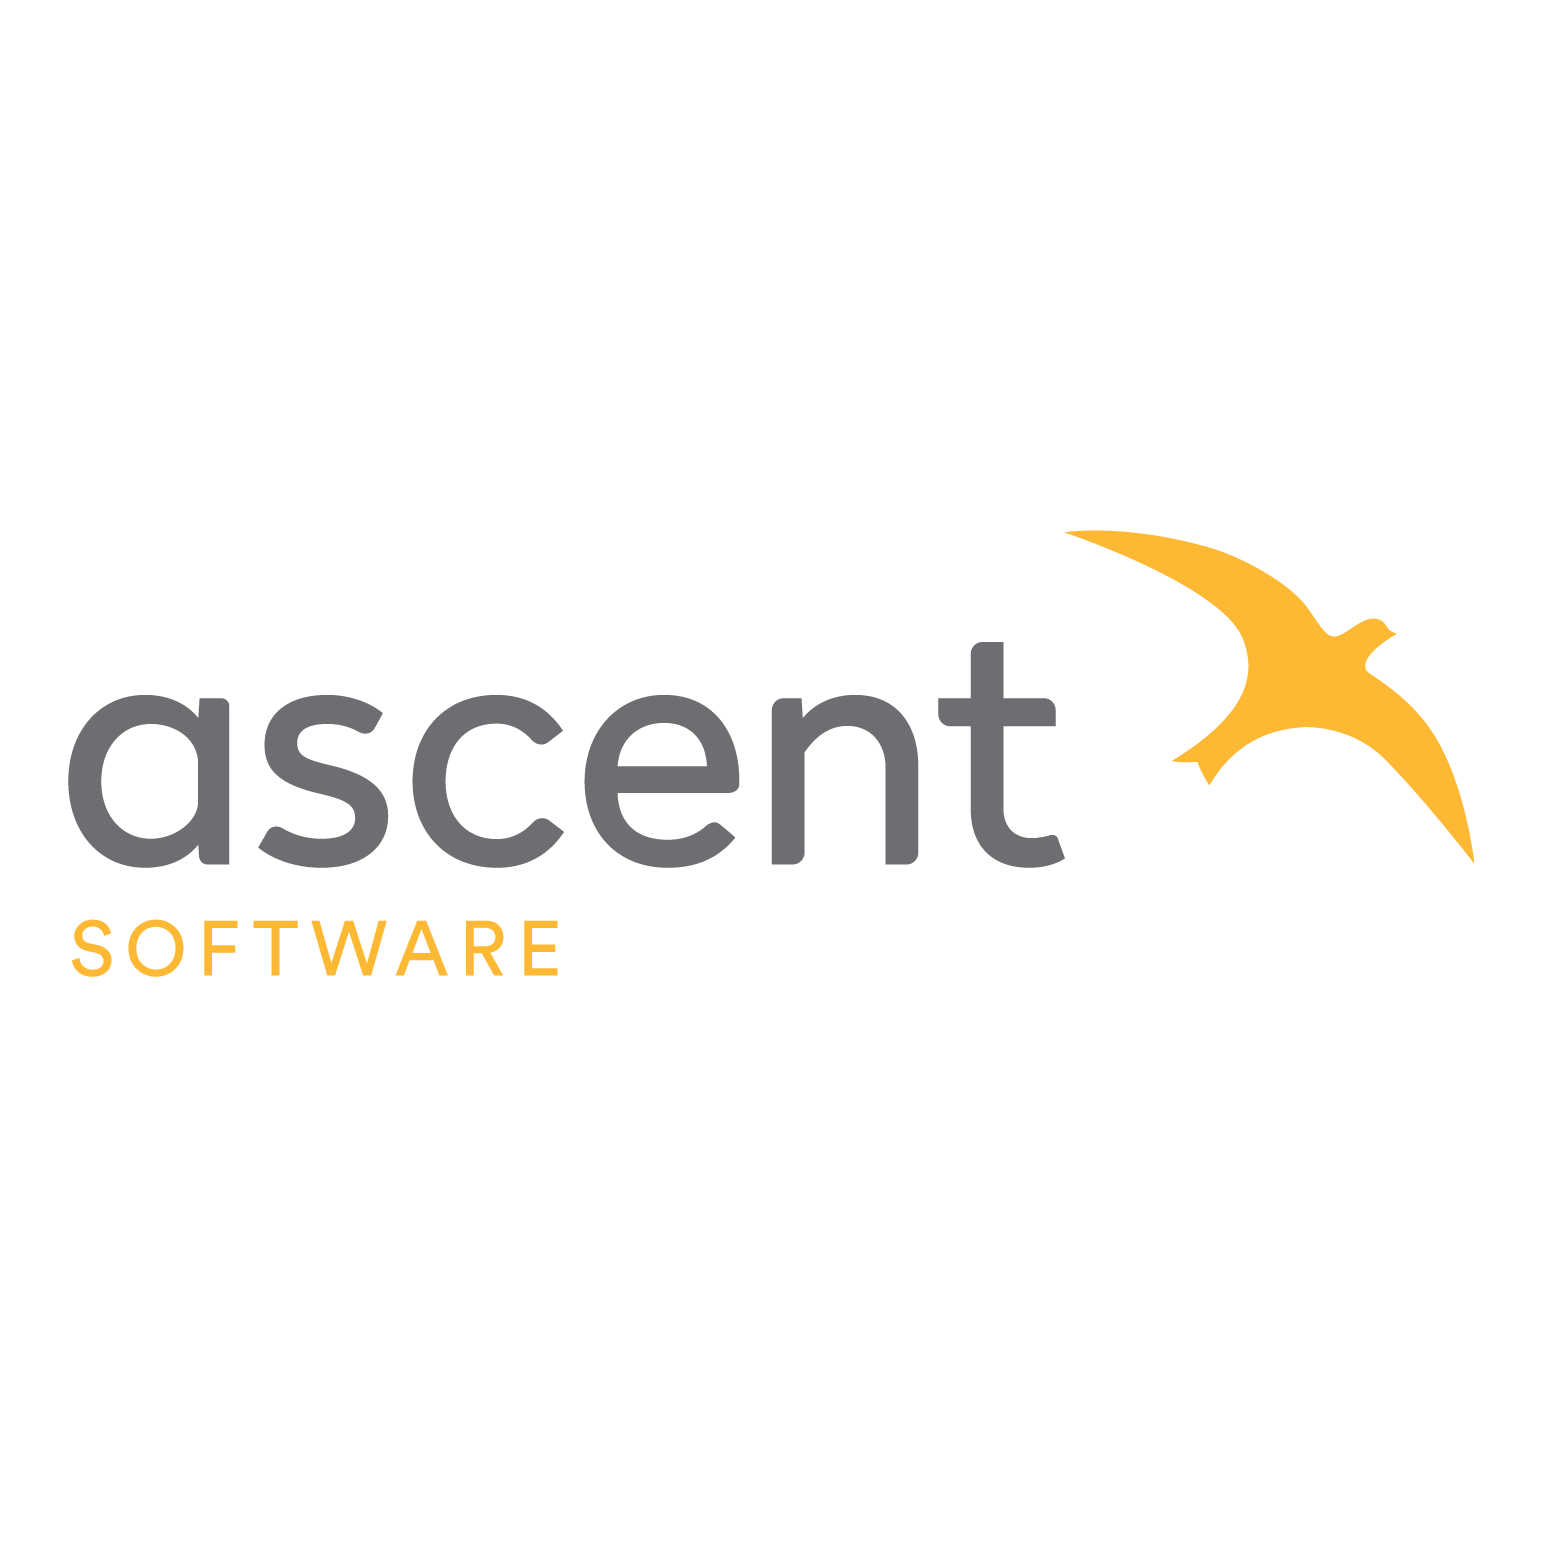 Ascent Software profile on Qualified.One